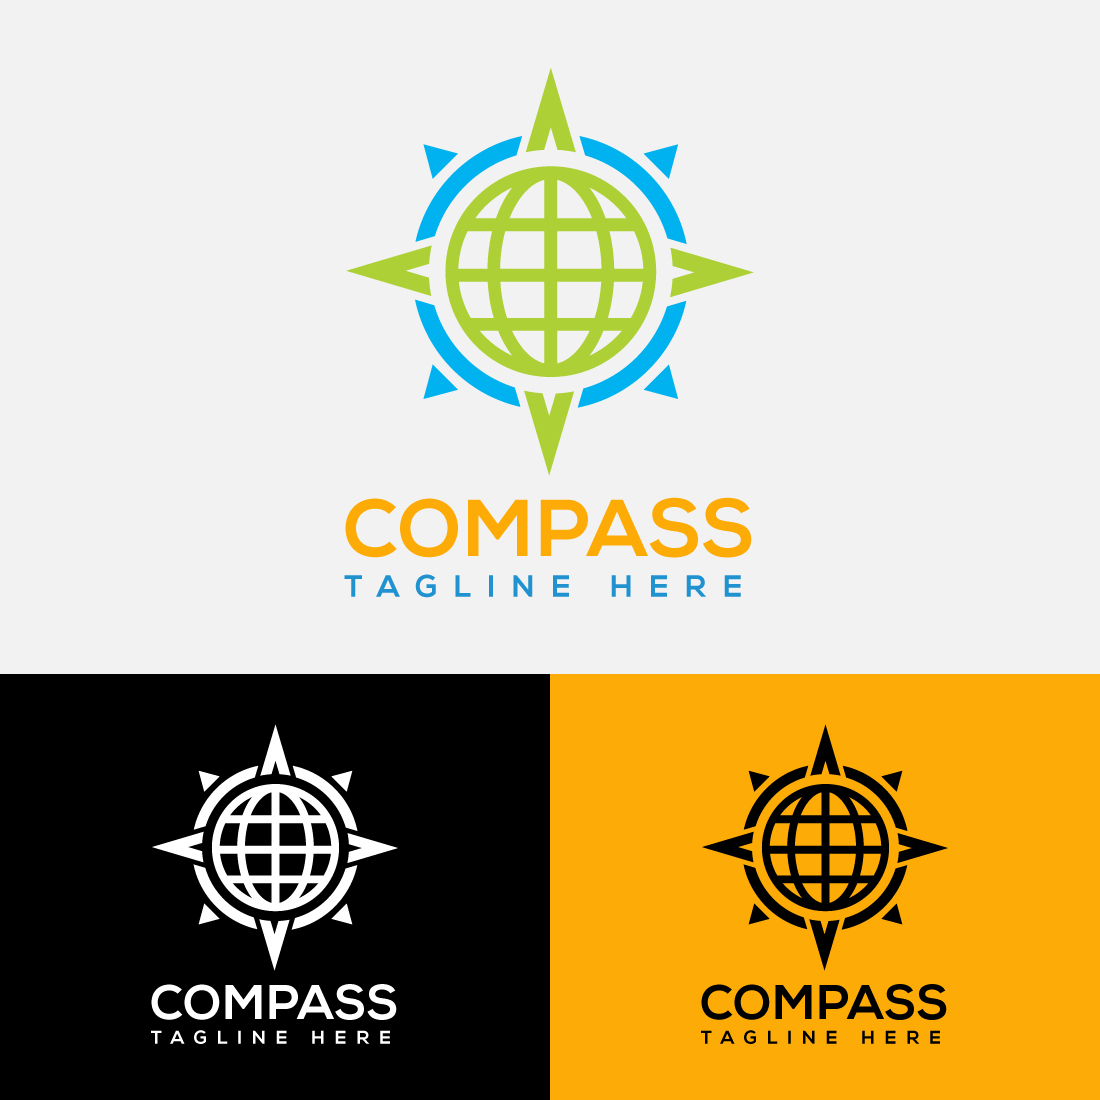 Collection of images of wonderful round logos in the form of a compass.